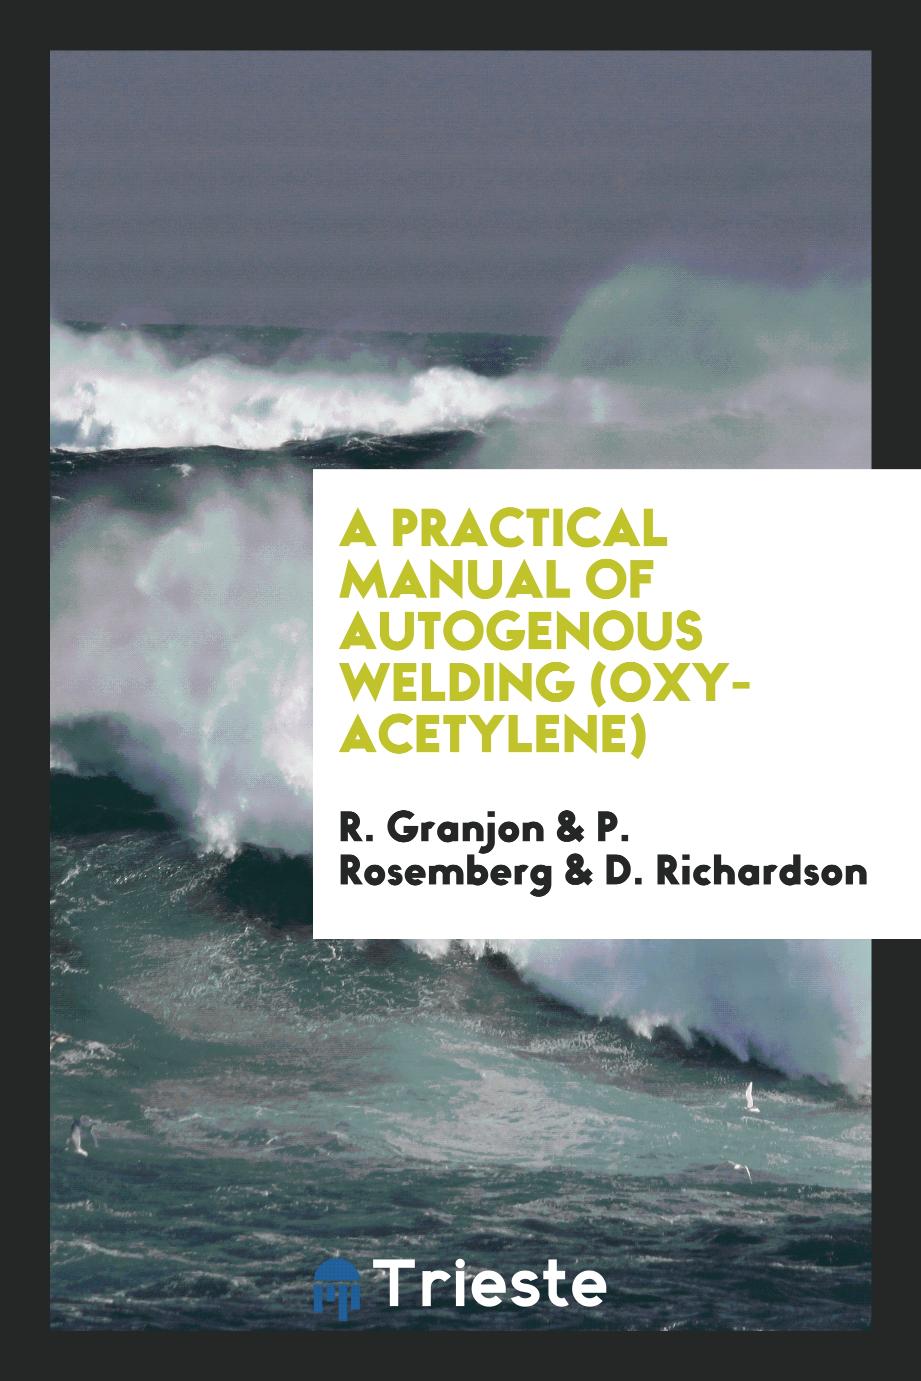 A Practical Manual of Autogenous Welding (Oxy-Acetylene)